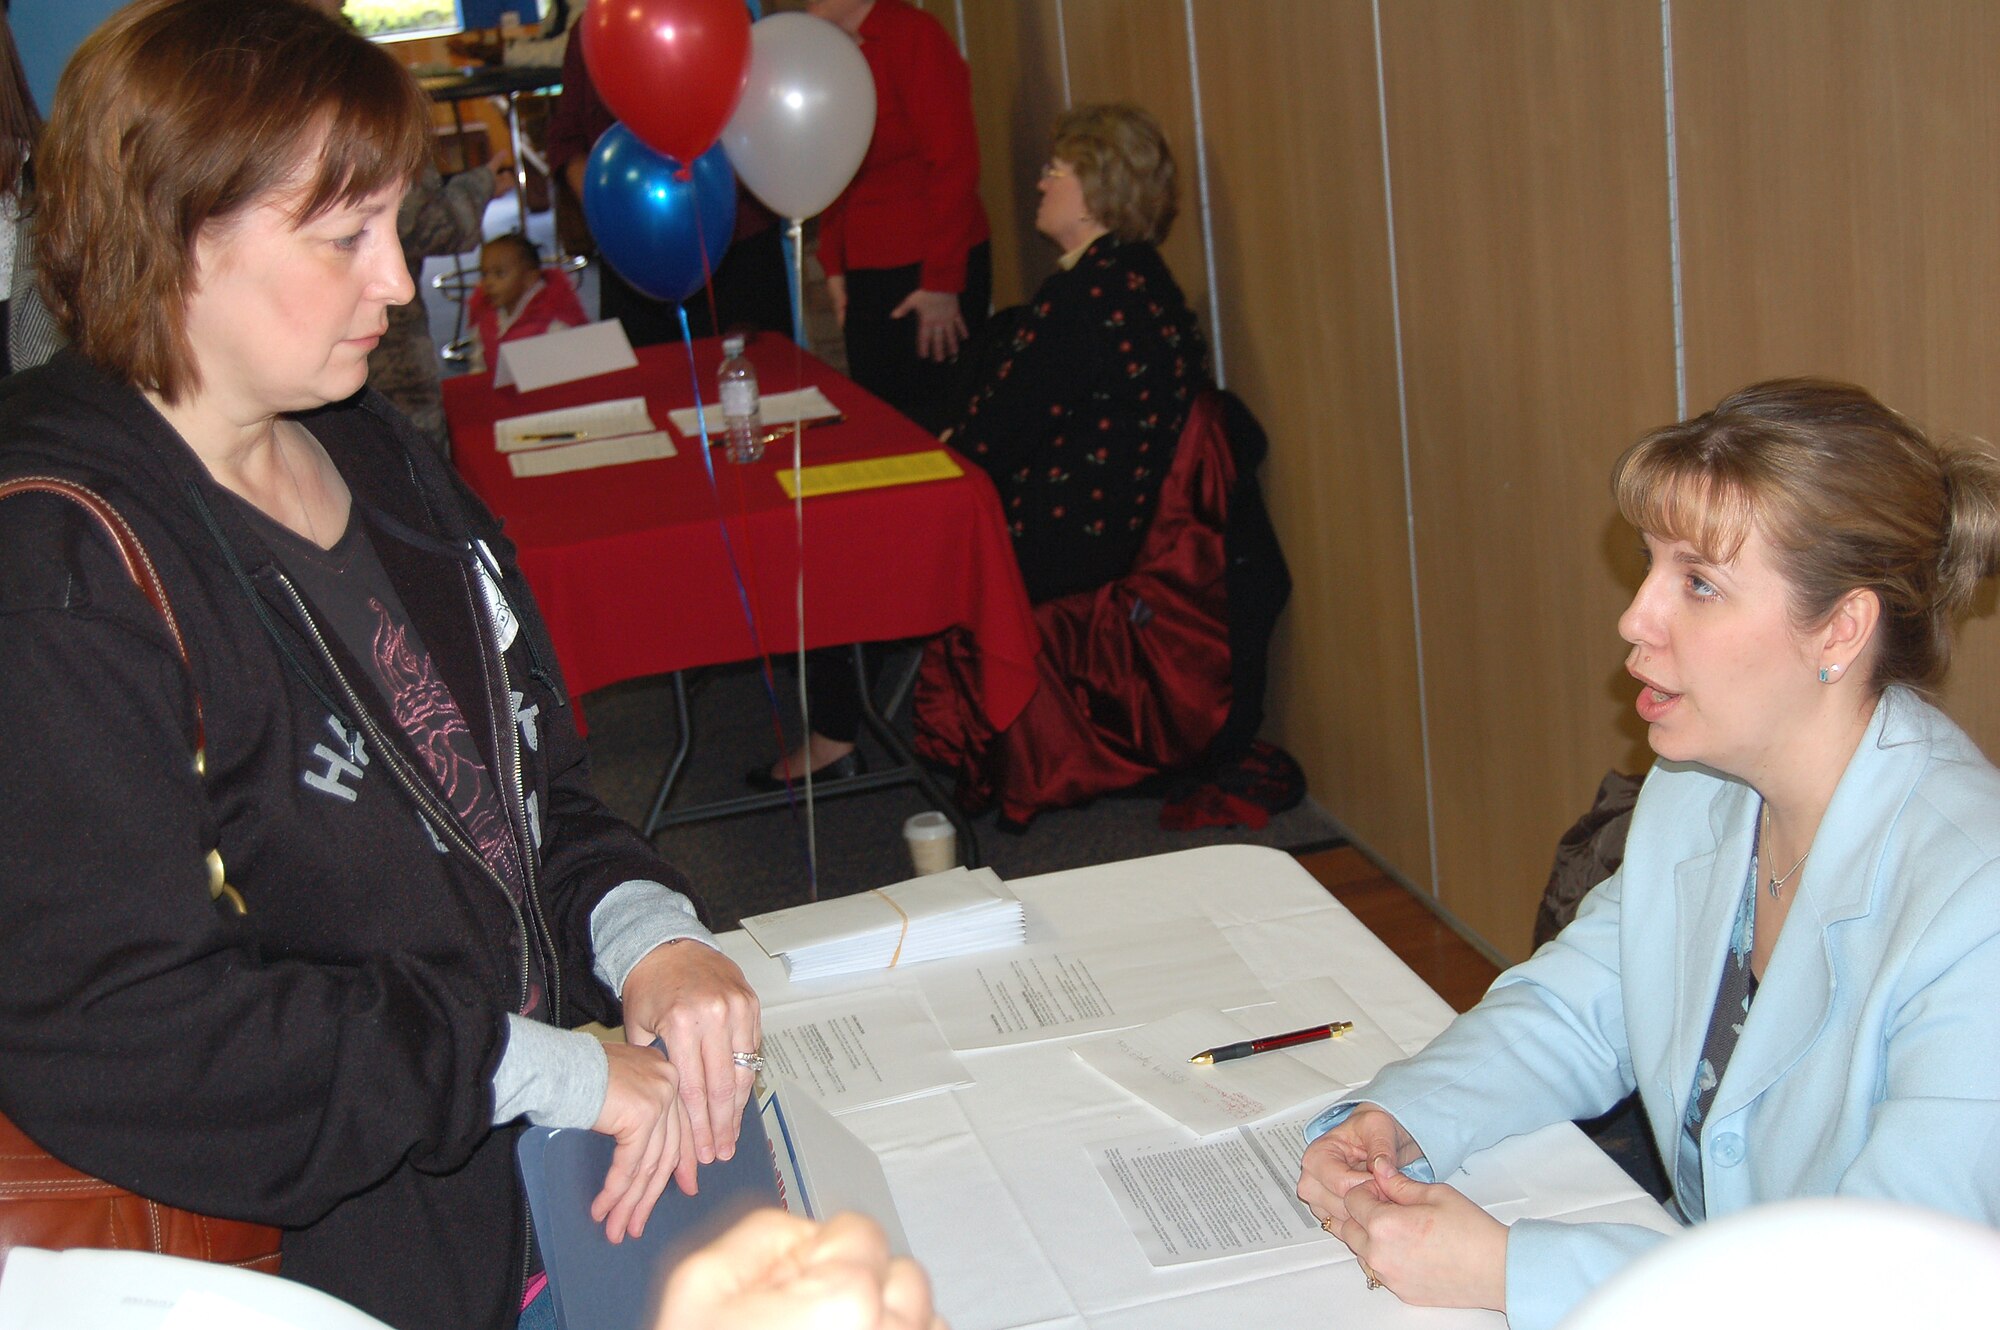 Christy Armstrong (right), 100th Mission Support Squadron human resources specialist, answers questions for a job hunter during an employment fair Feb. 28 at RAF Mildenhall.  The fair provided complete lists of both civil service and non-appropriated fund positions at the base.  There were also step-by-step workshops on the application and hiring process.  (U.S. Air Force photo by Tech. Sgt. Eric Petosky)